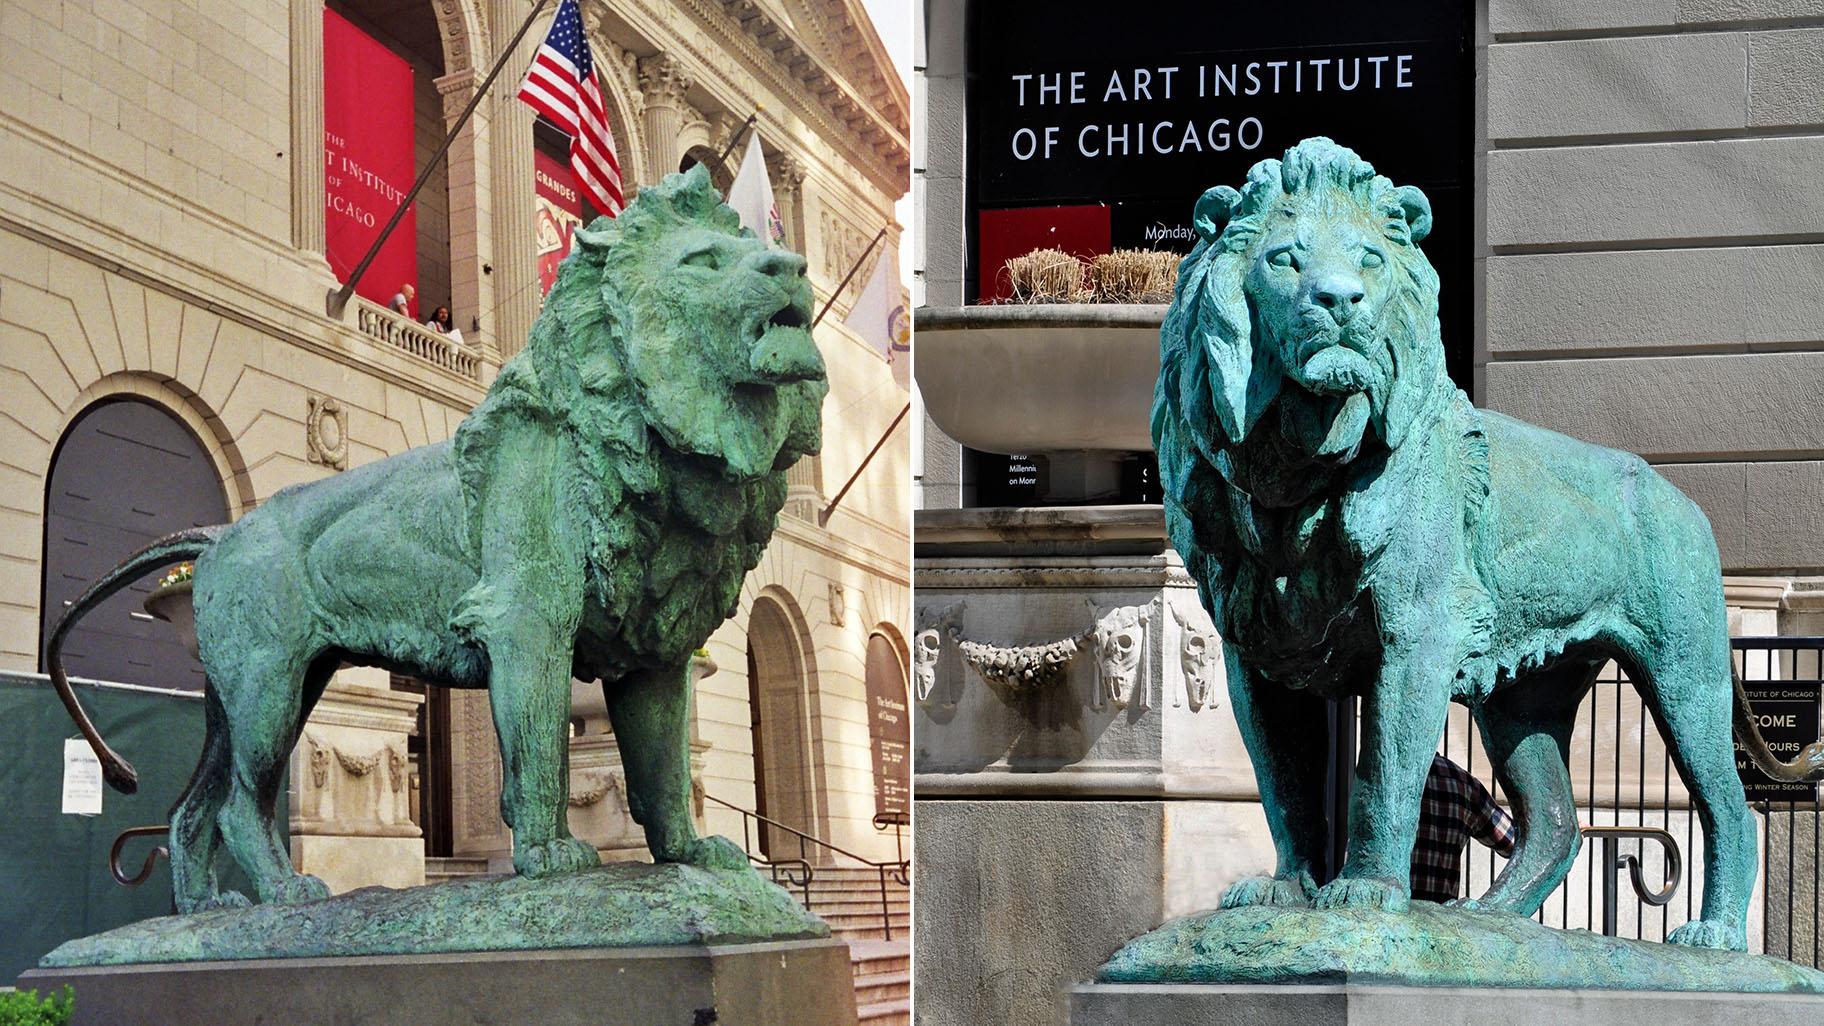 The north lion, left, and south lion at the Art Institute of Chicago. (Credit: Kim Scarborough / Wikimedia Commons; Heather Paul / Flickr)